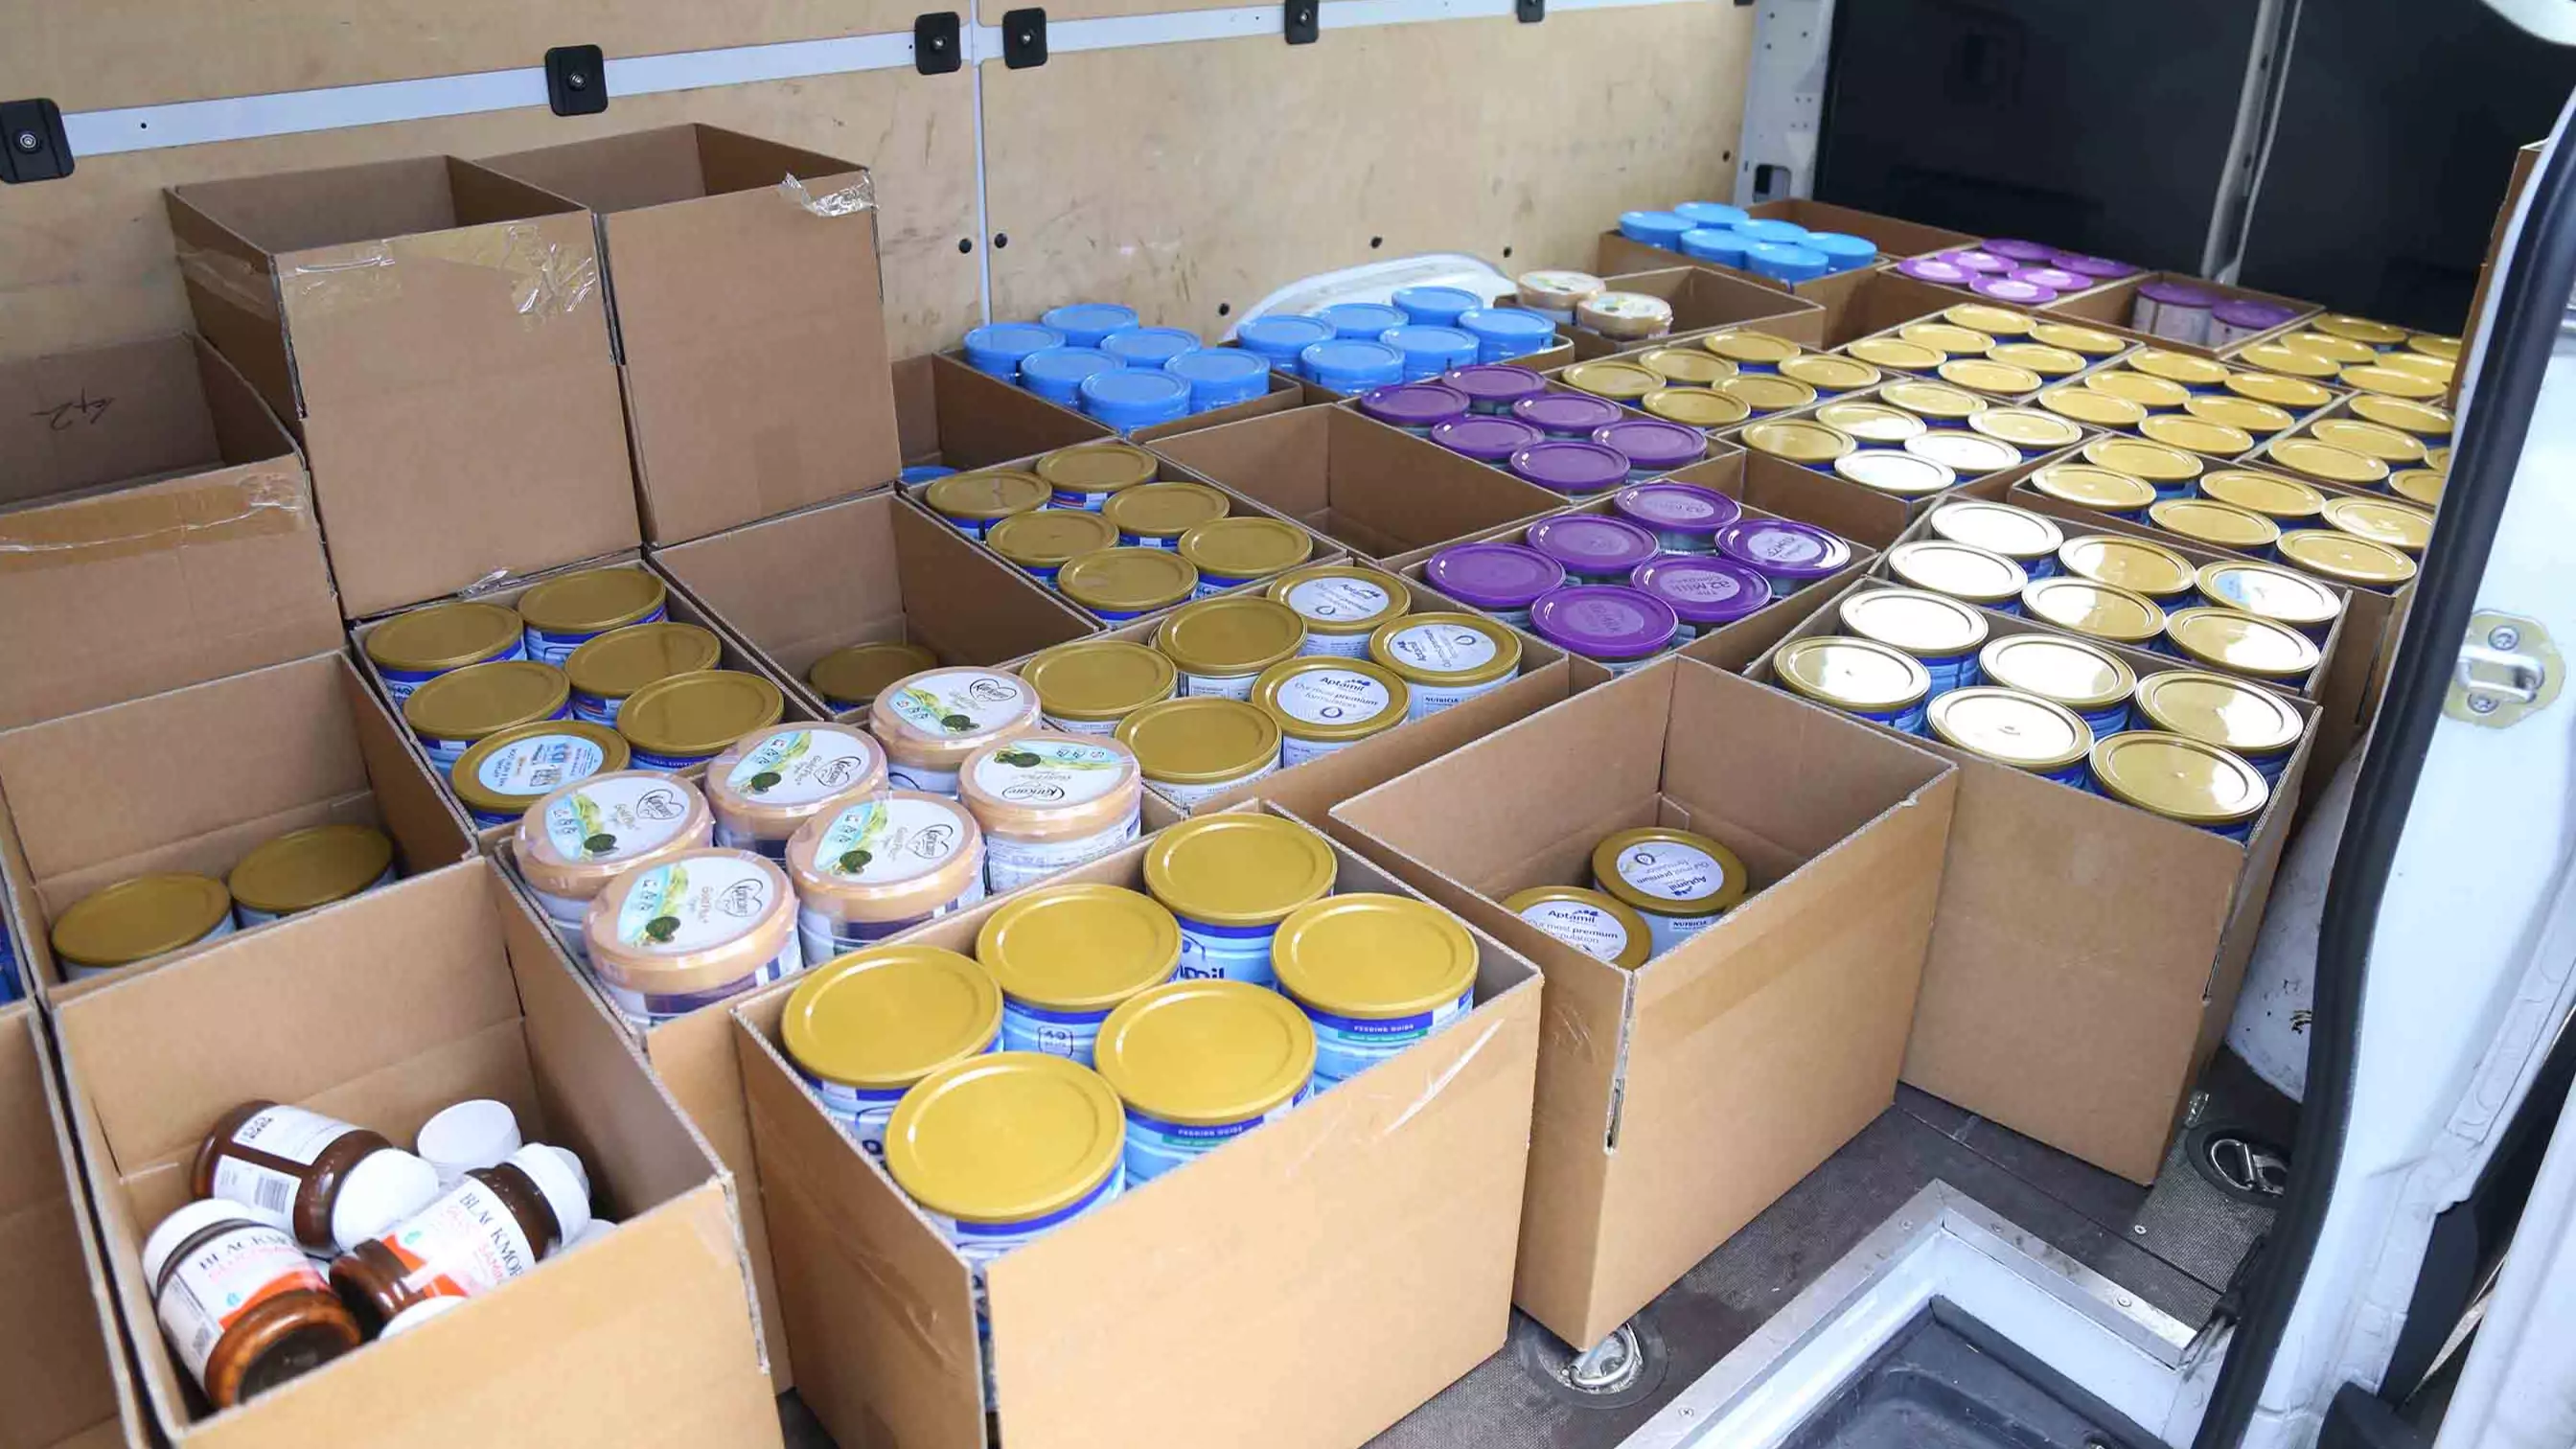 Australian Police Bust Massive Alleged Baby Formula Syndicate Operating In Sydney